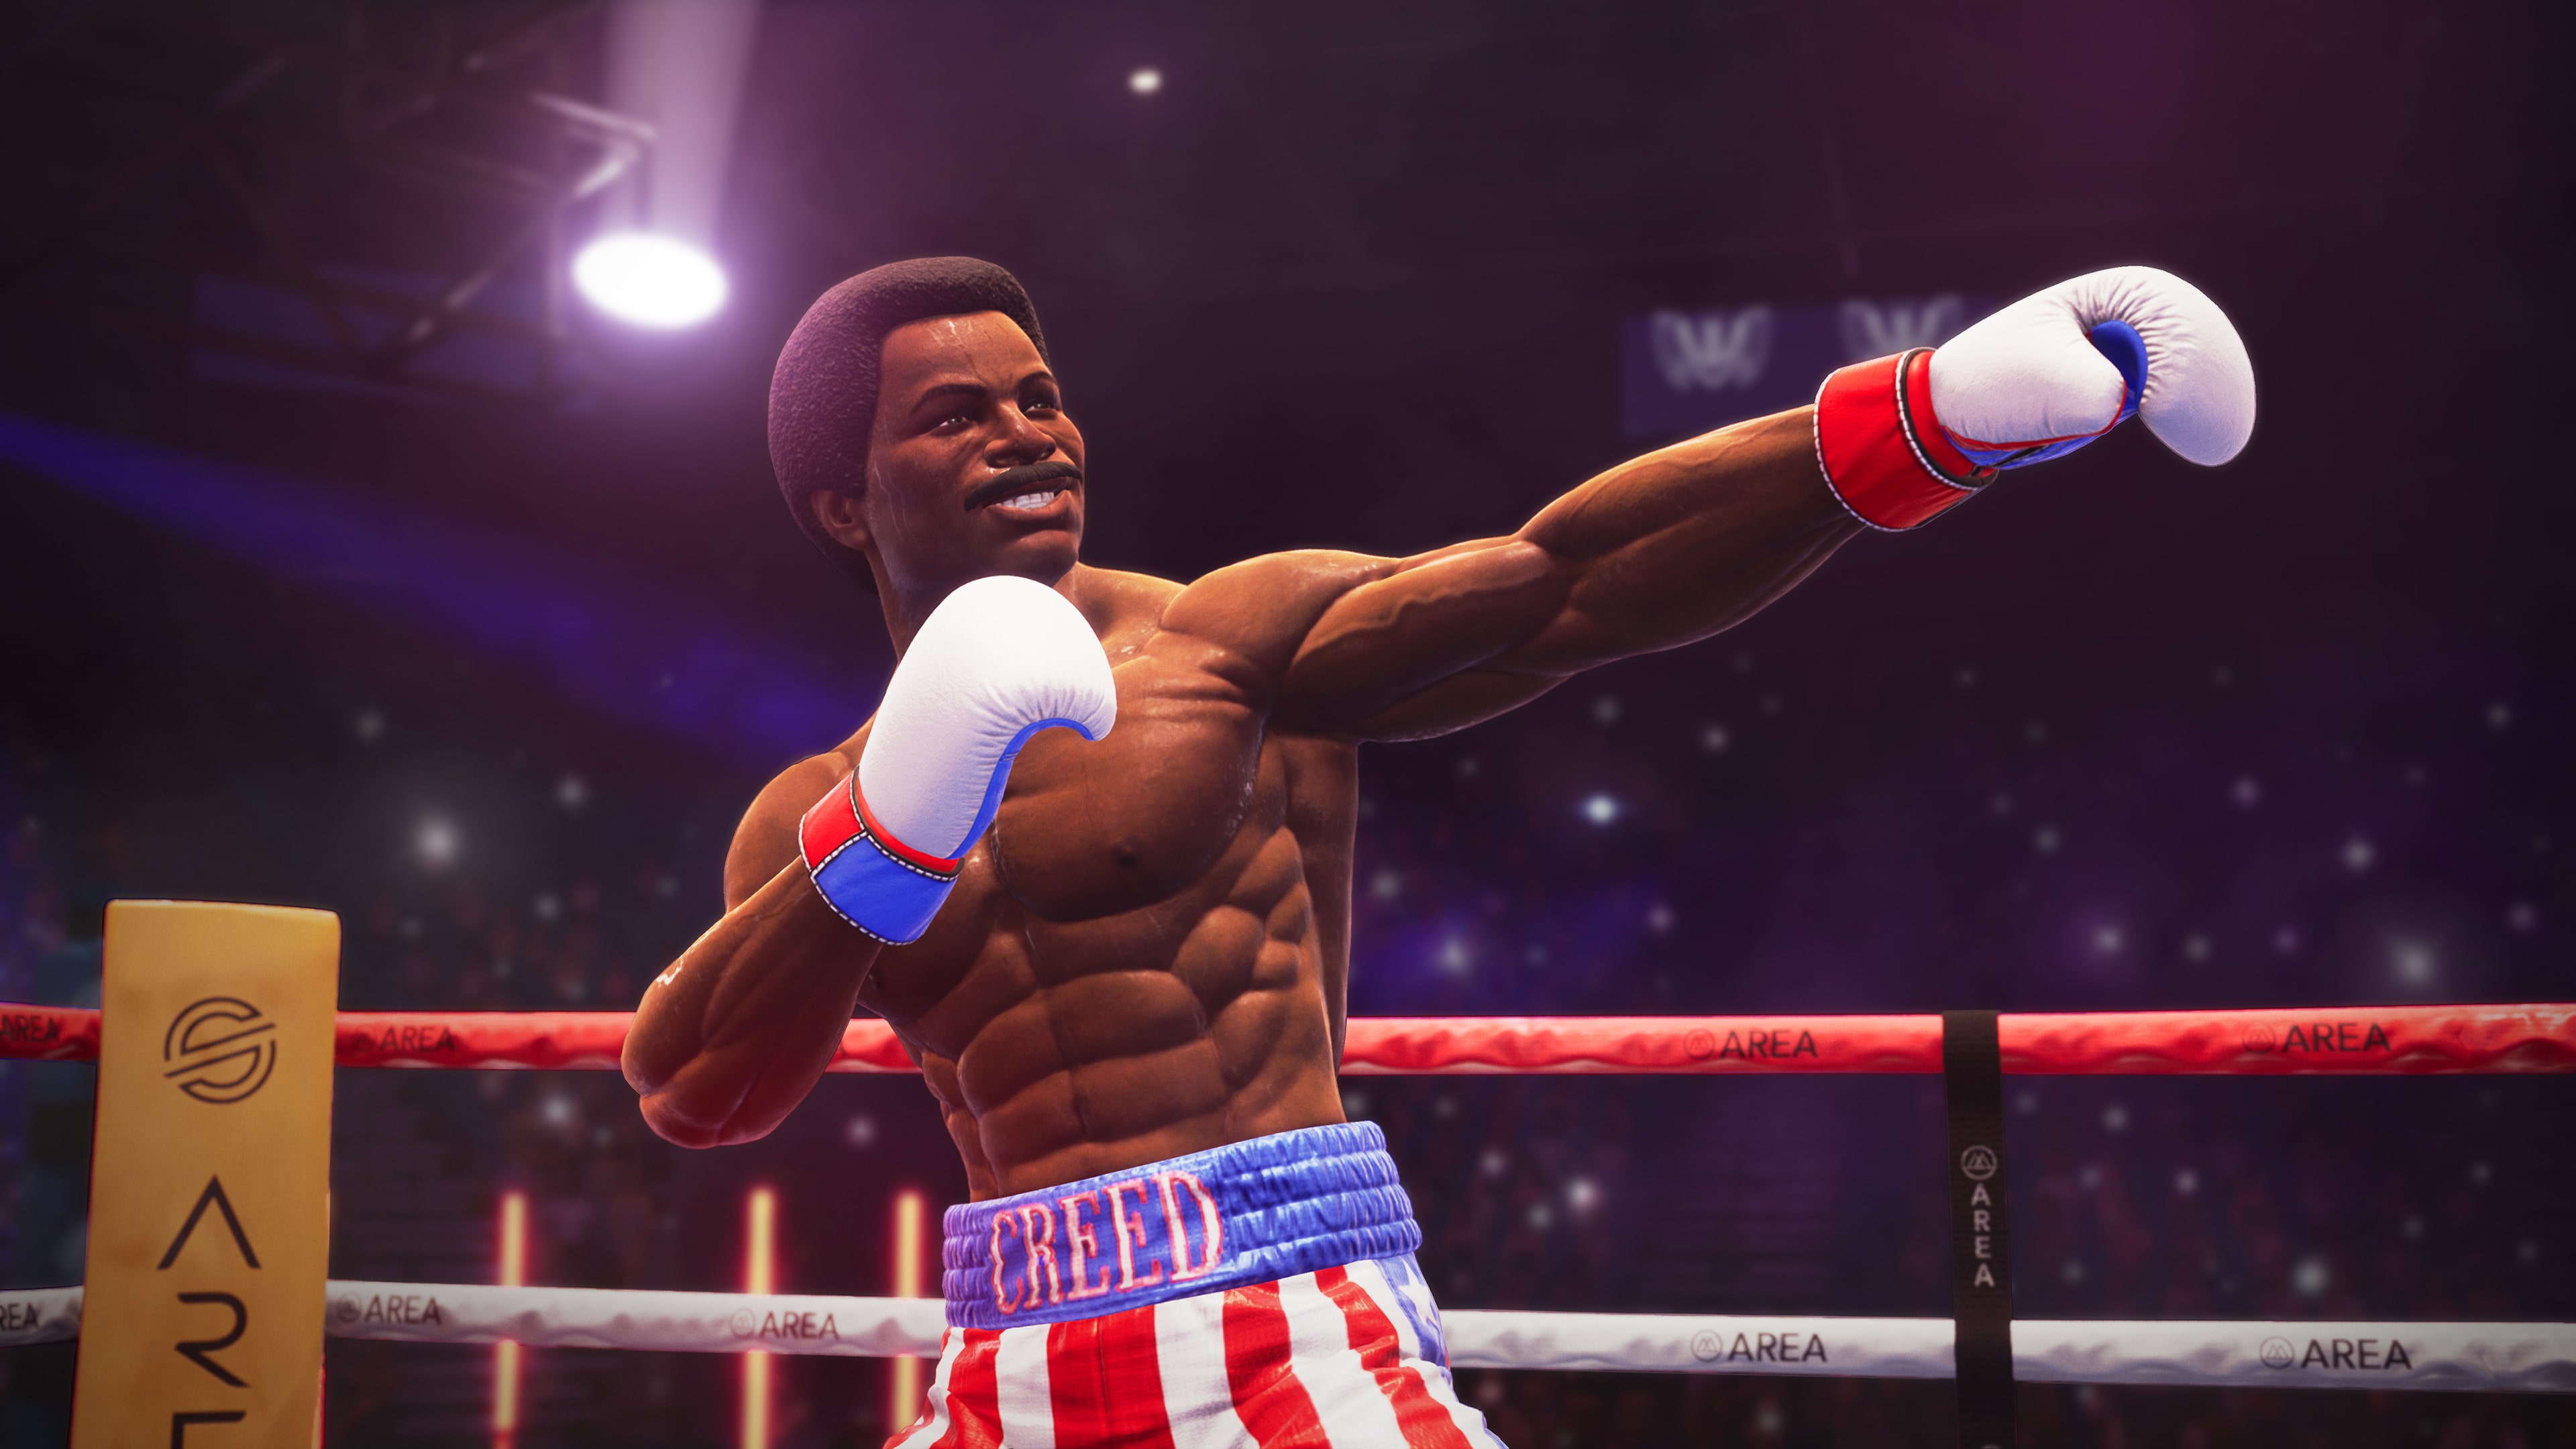 BIG RUMBLE BOXING CREED CHAMPIONS - Test PS5 - Insert Coin